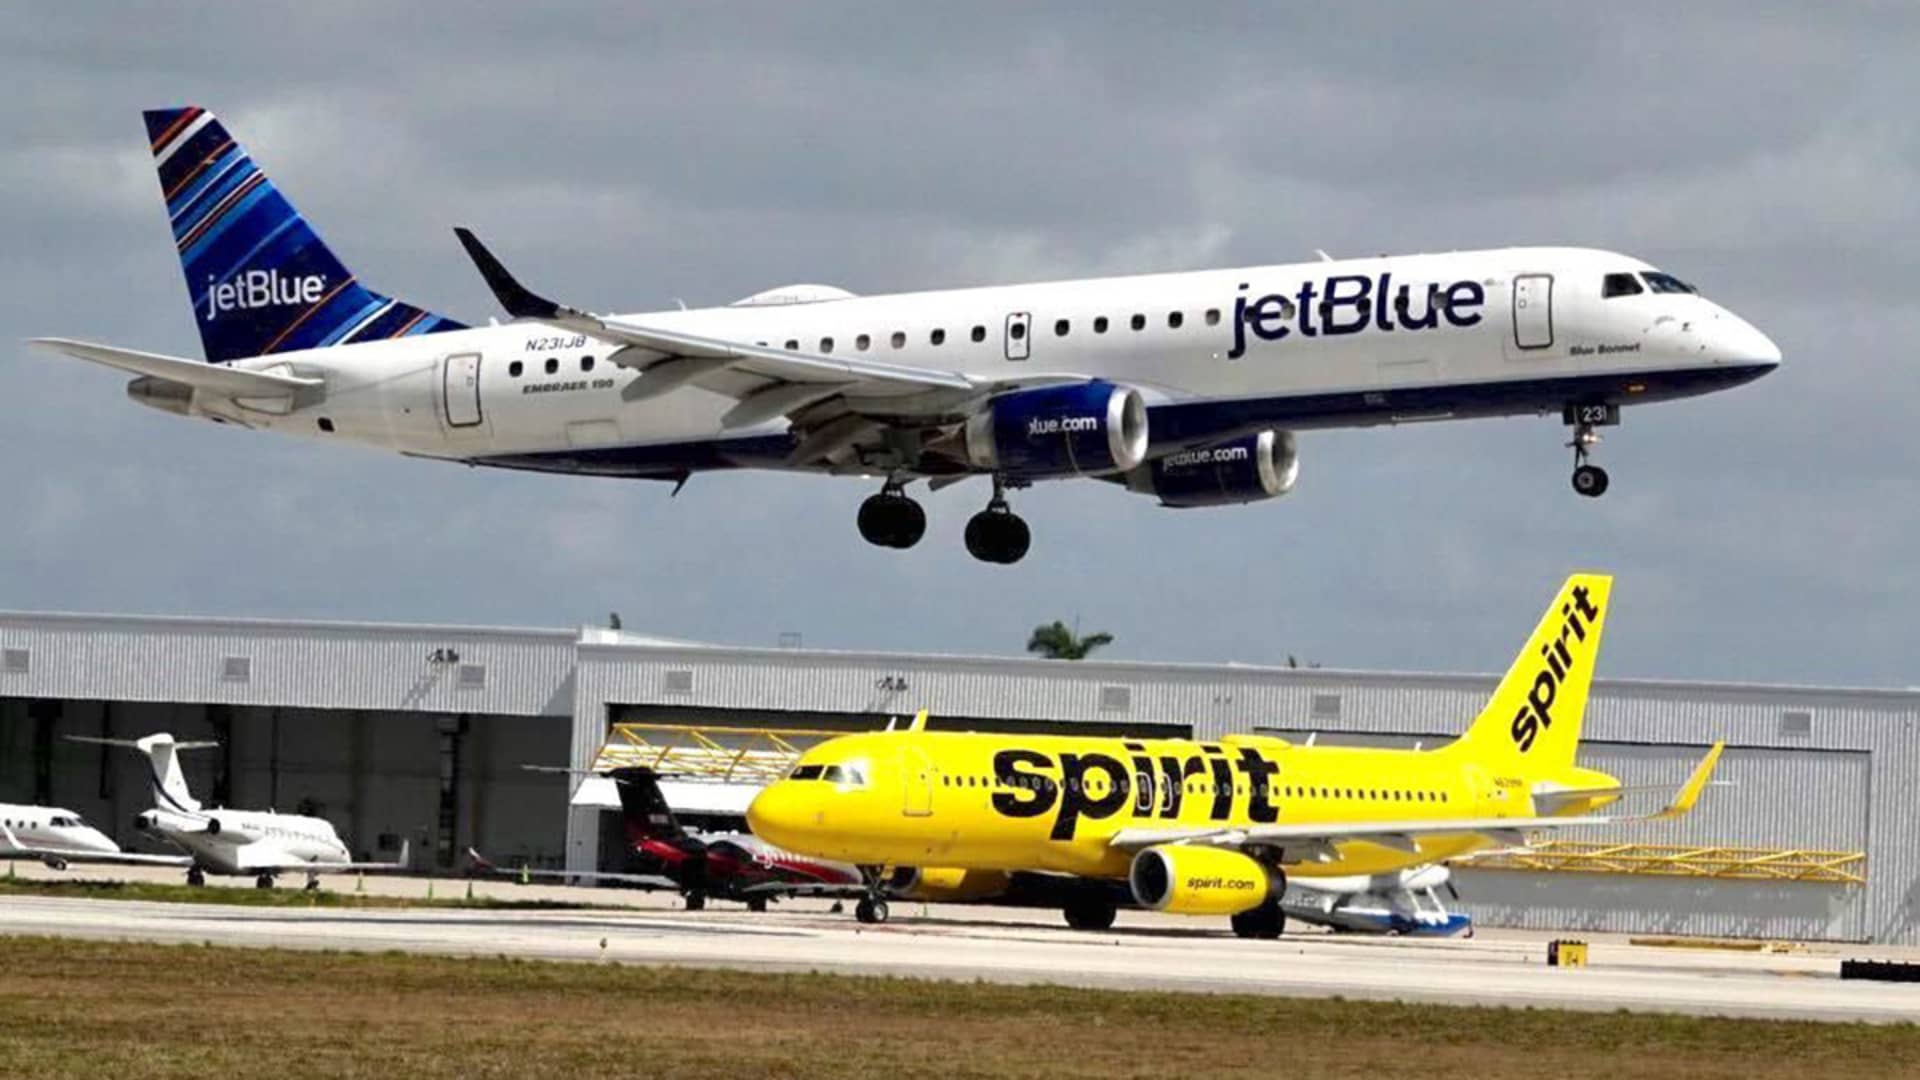 A JetBlue airliner lands past a Spirit Airlines jet on taxi way at Fort Lauderdale Hollywood International Airport on Monday, April 25, 2022. (Joe Cavaretta/Sun Sentinel/Tribune News Service via Getty Images)